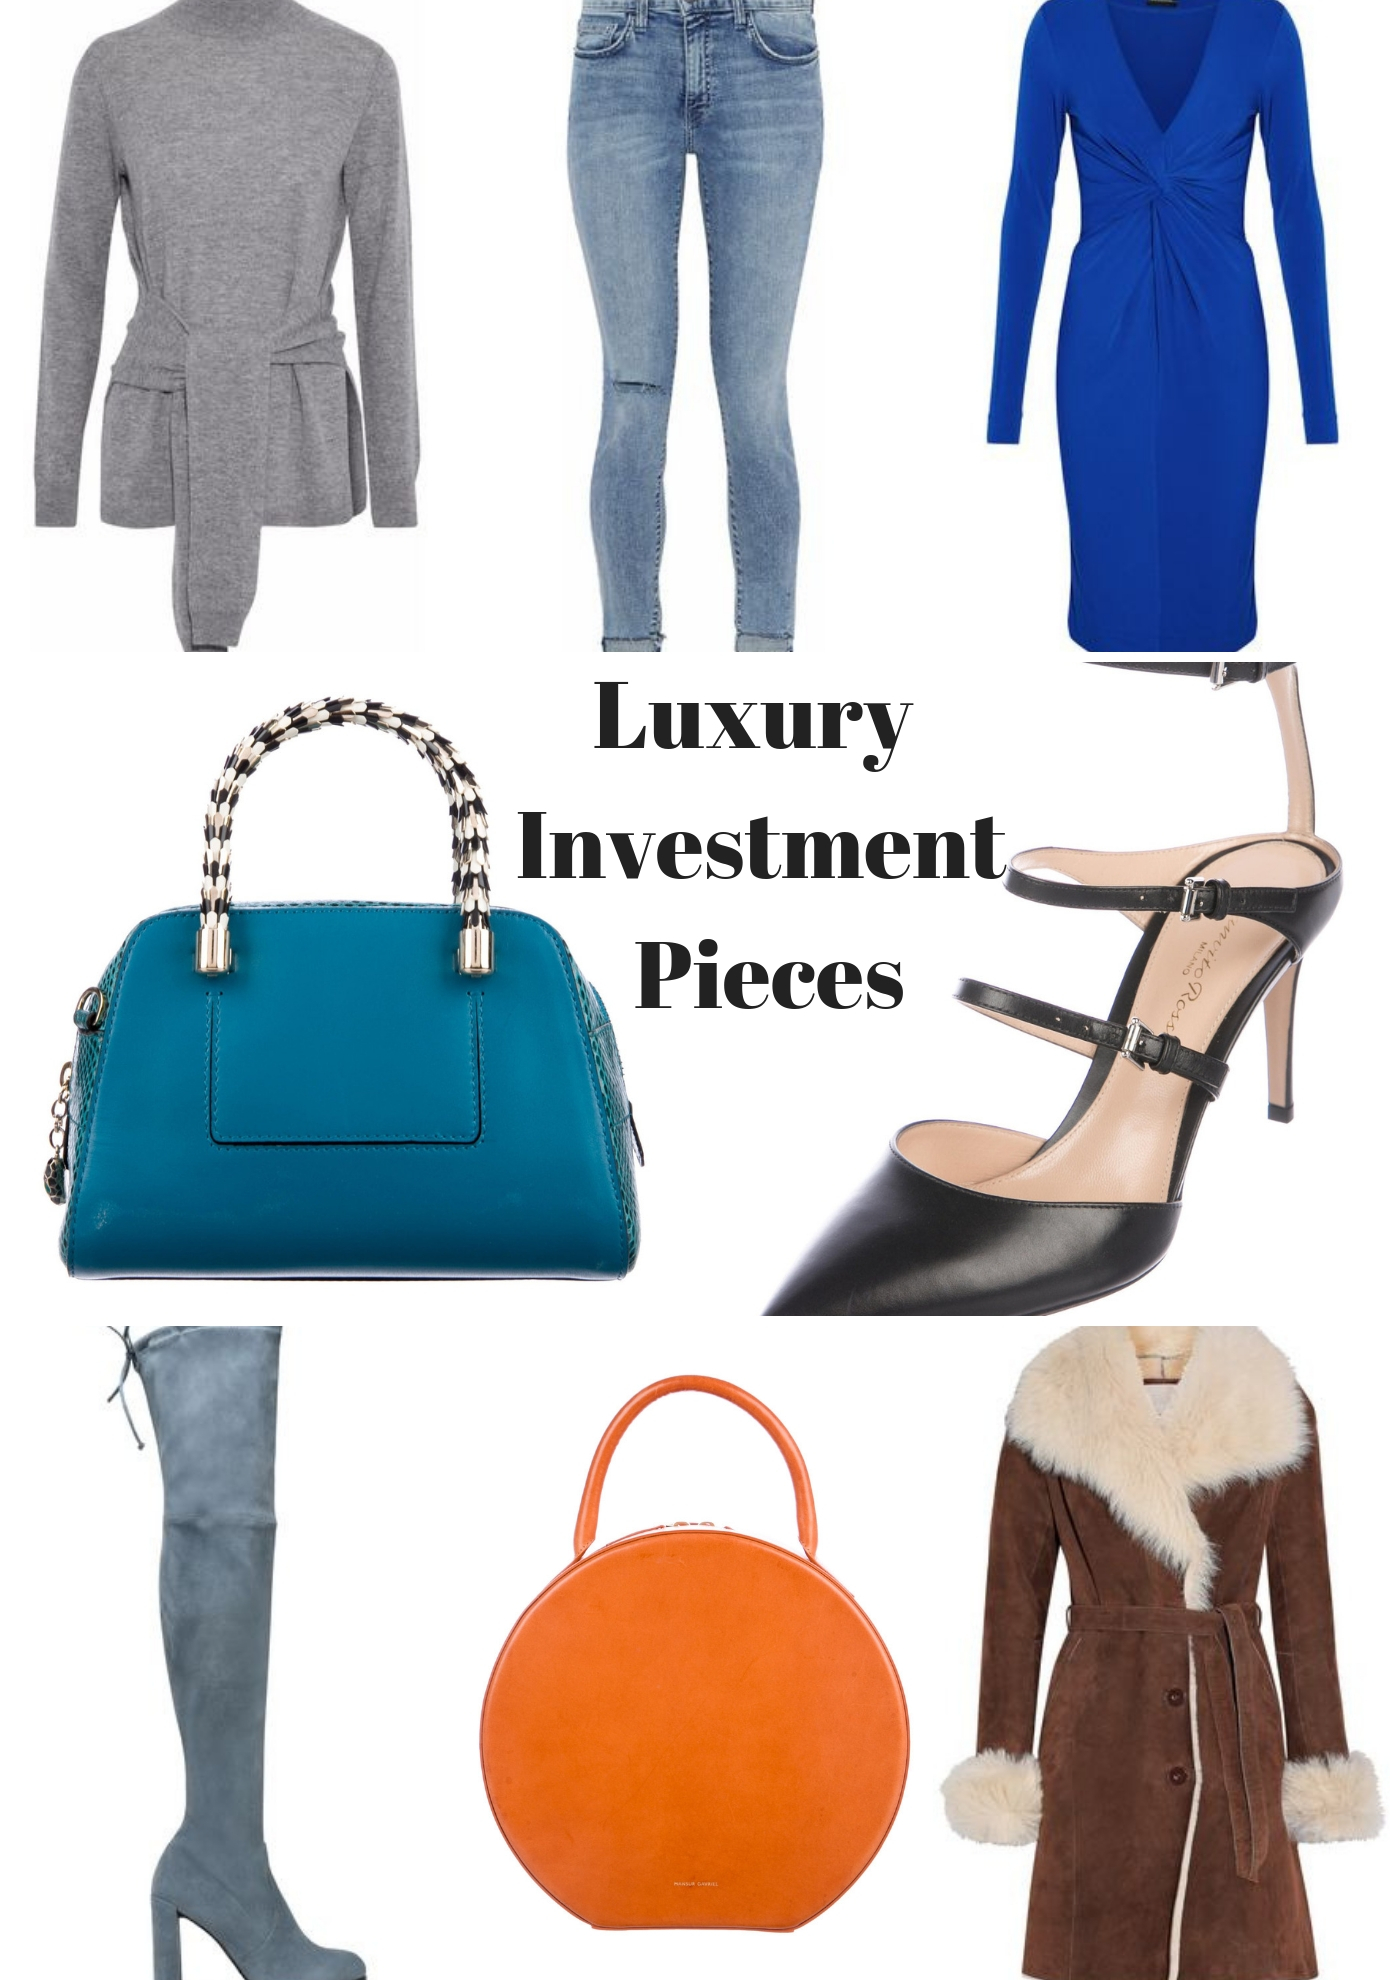 What fashion items are great investment pieces?